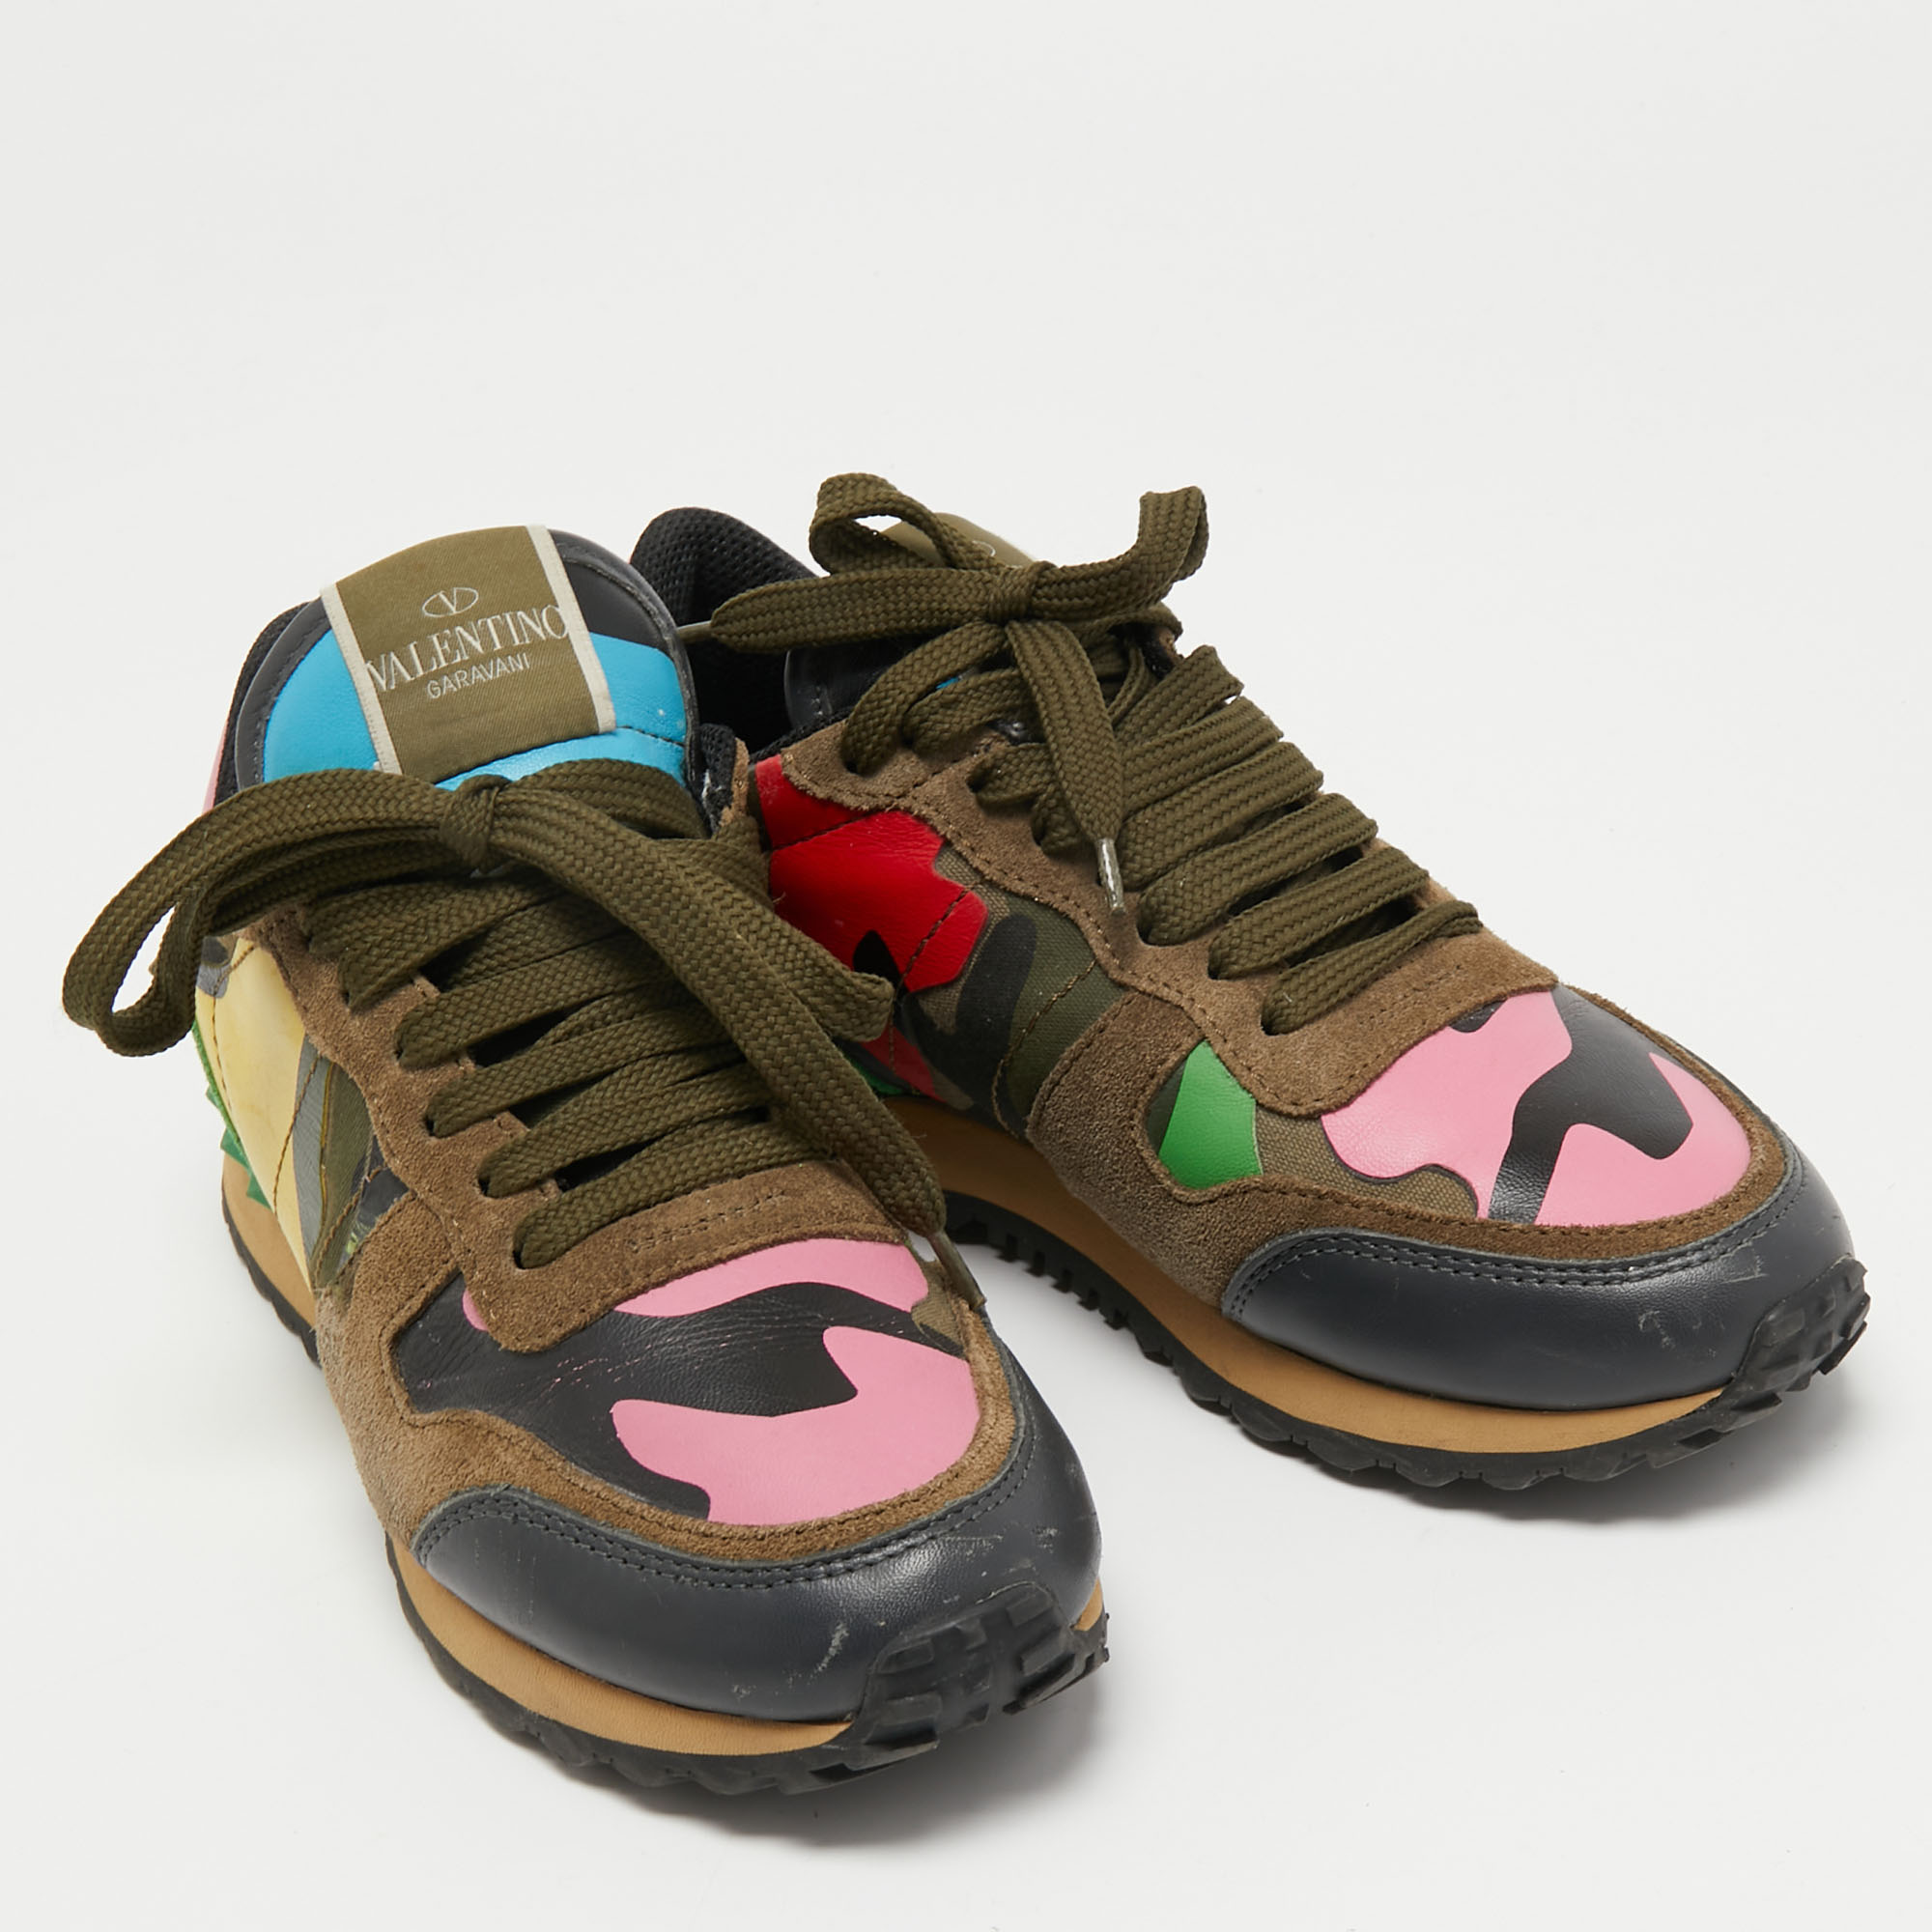 Valentino Multicolor Suede, Camo Print Leather And Canvas Rockrunner Sneakers Size 35.5